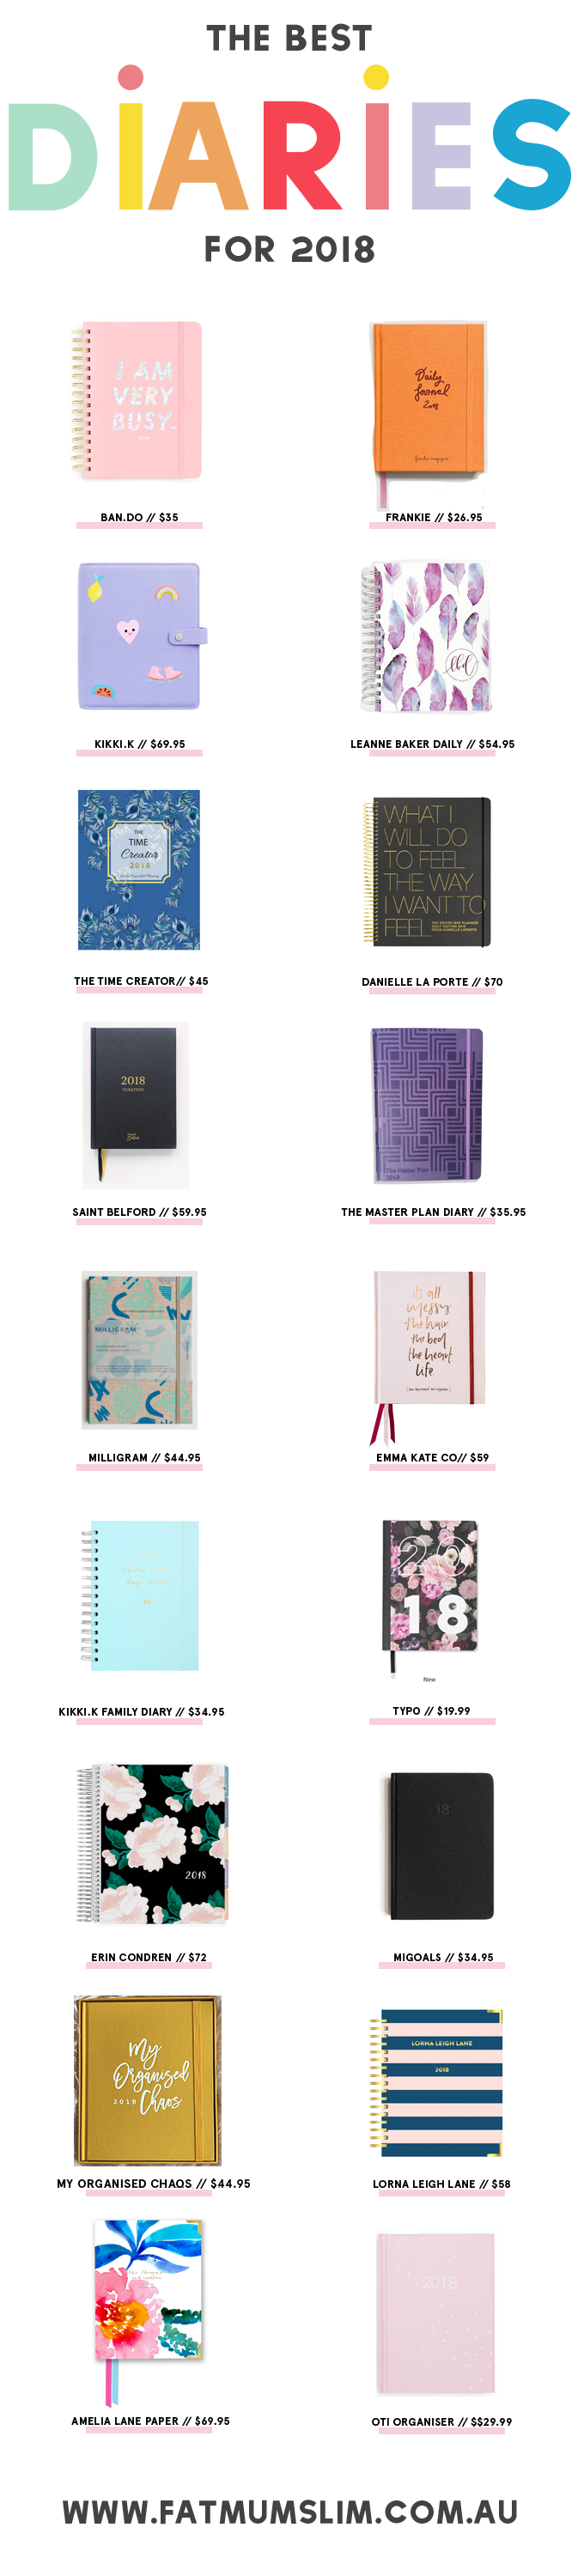 The Best Diaries for 2018: Check out this round up of the best diaries for the new year ahead...